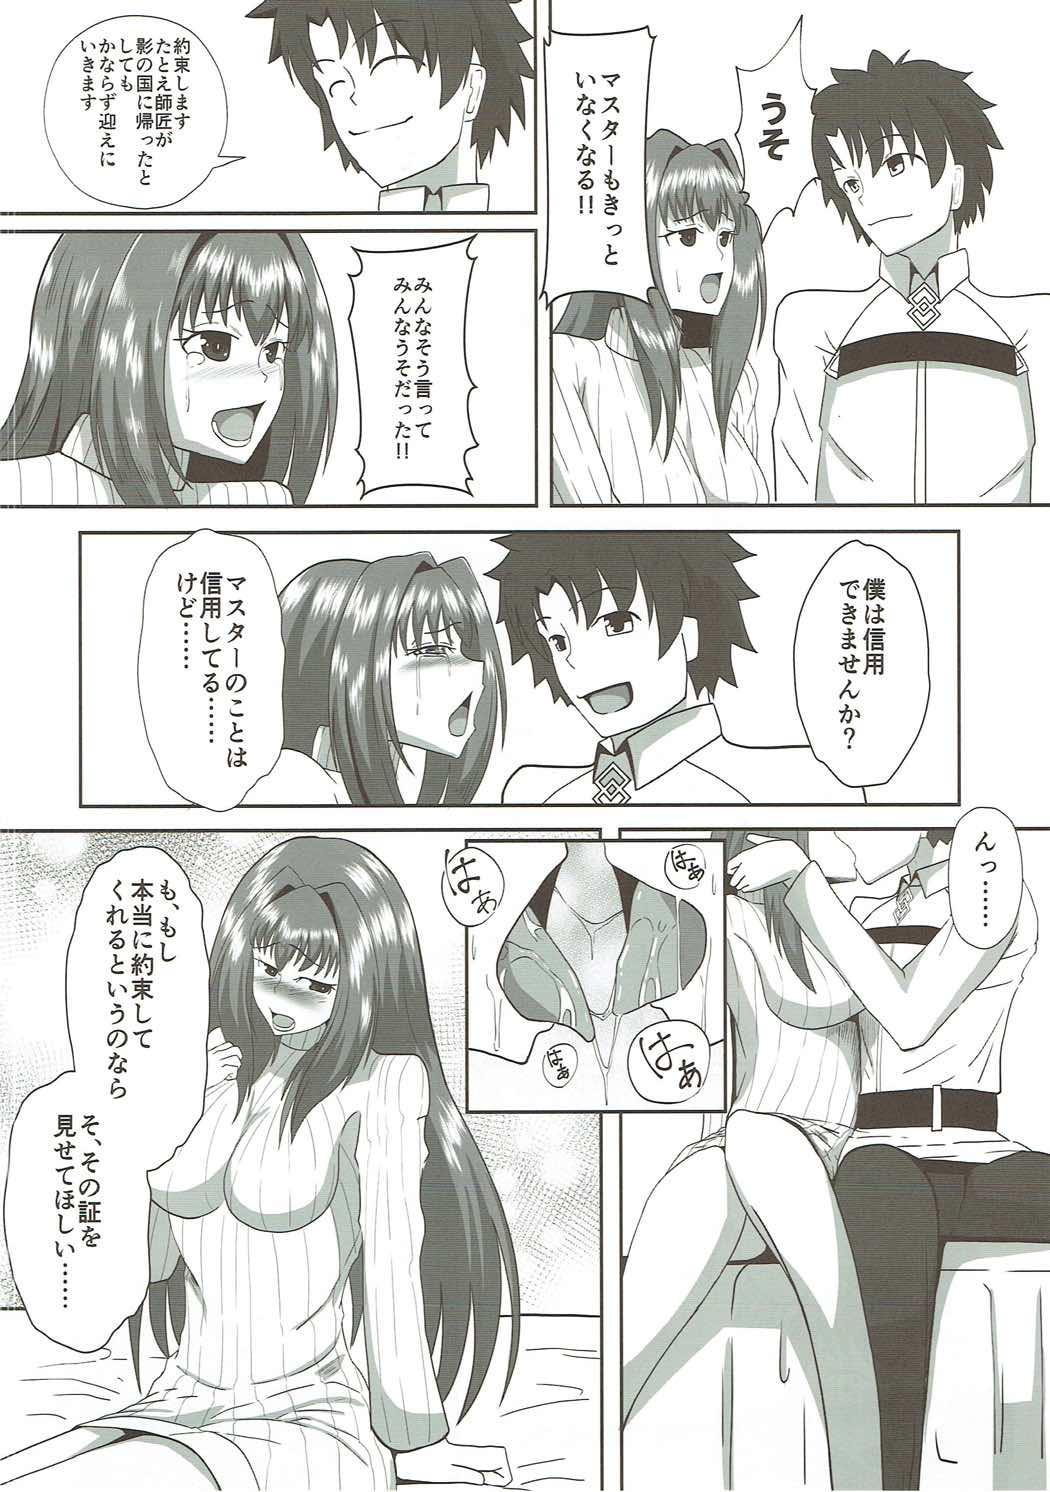 Gaping Scathach Alternative - Fate grand order Scene - Page 7